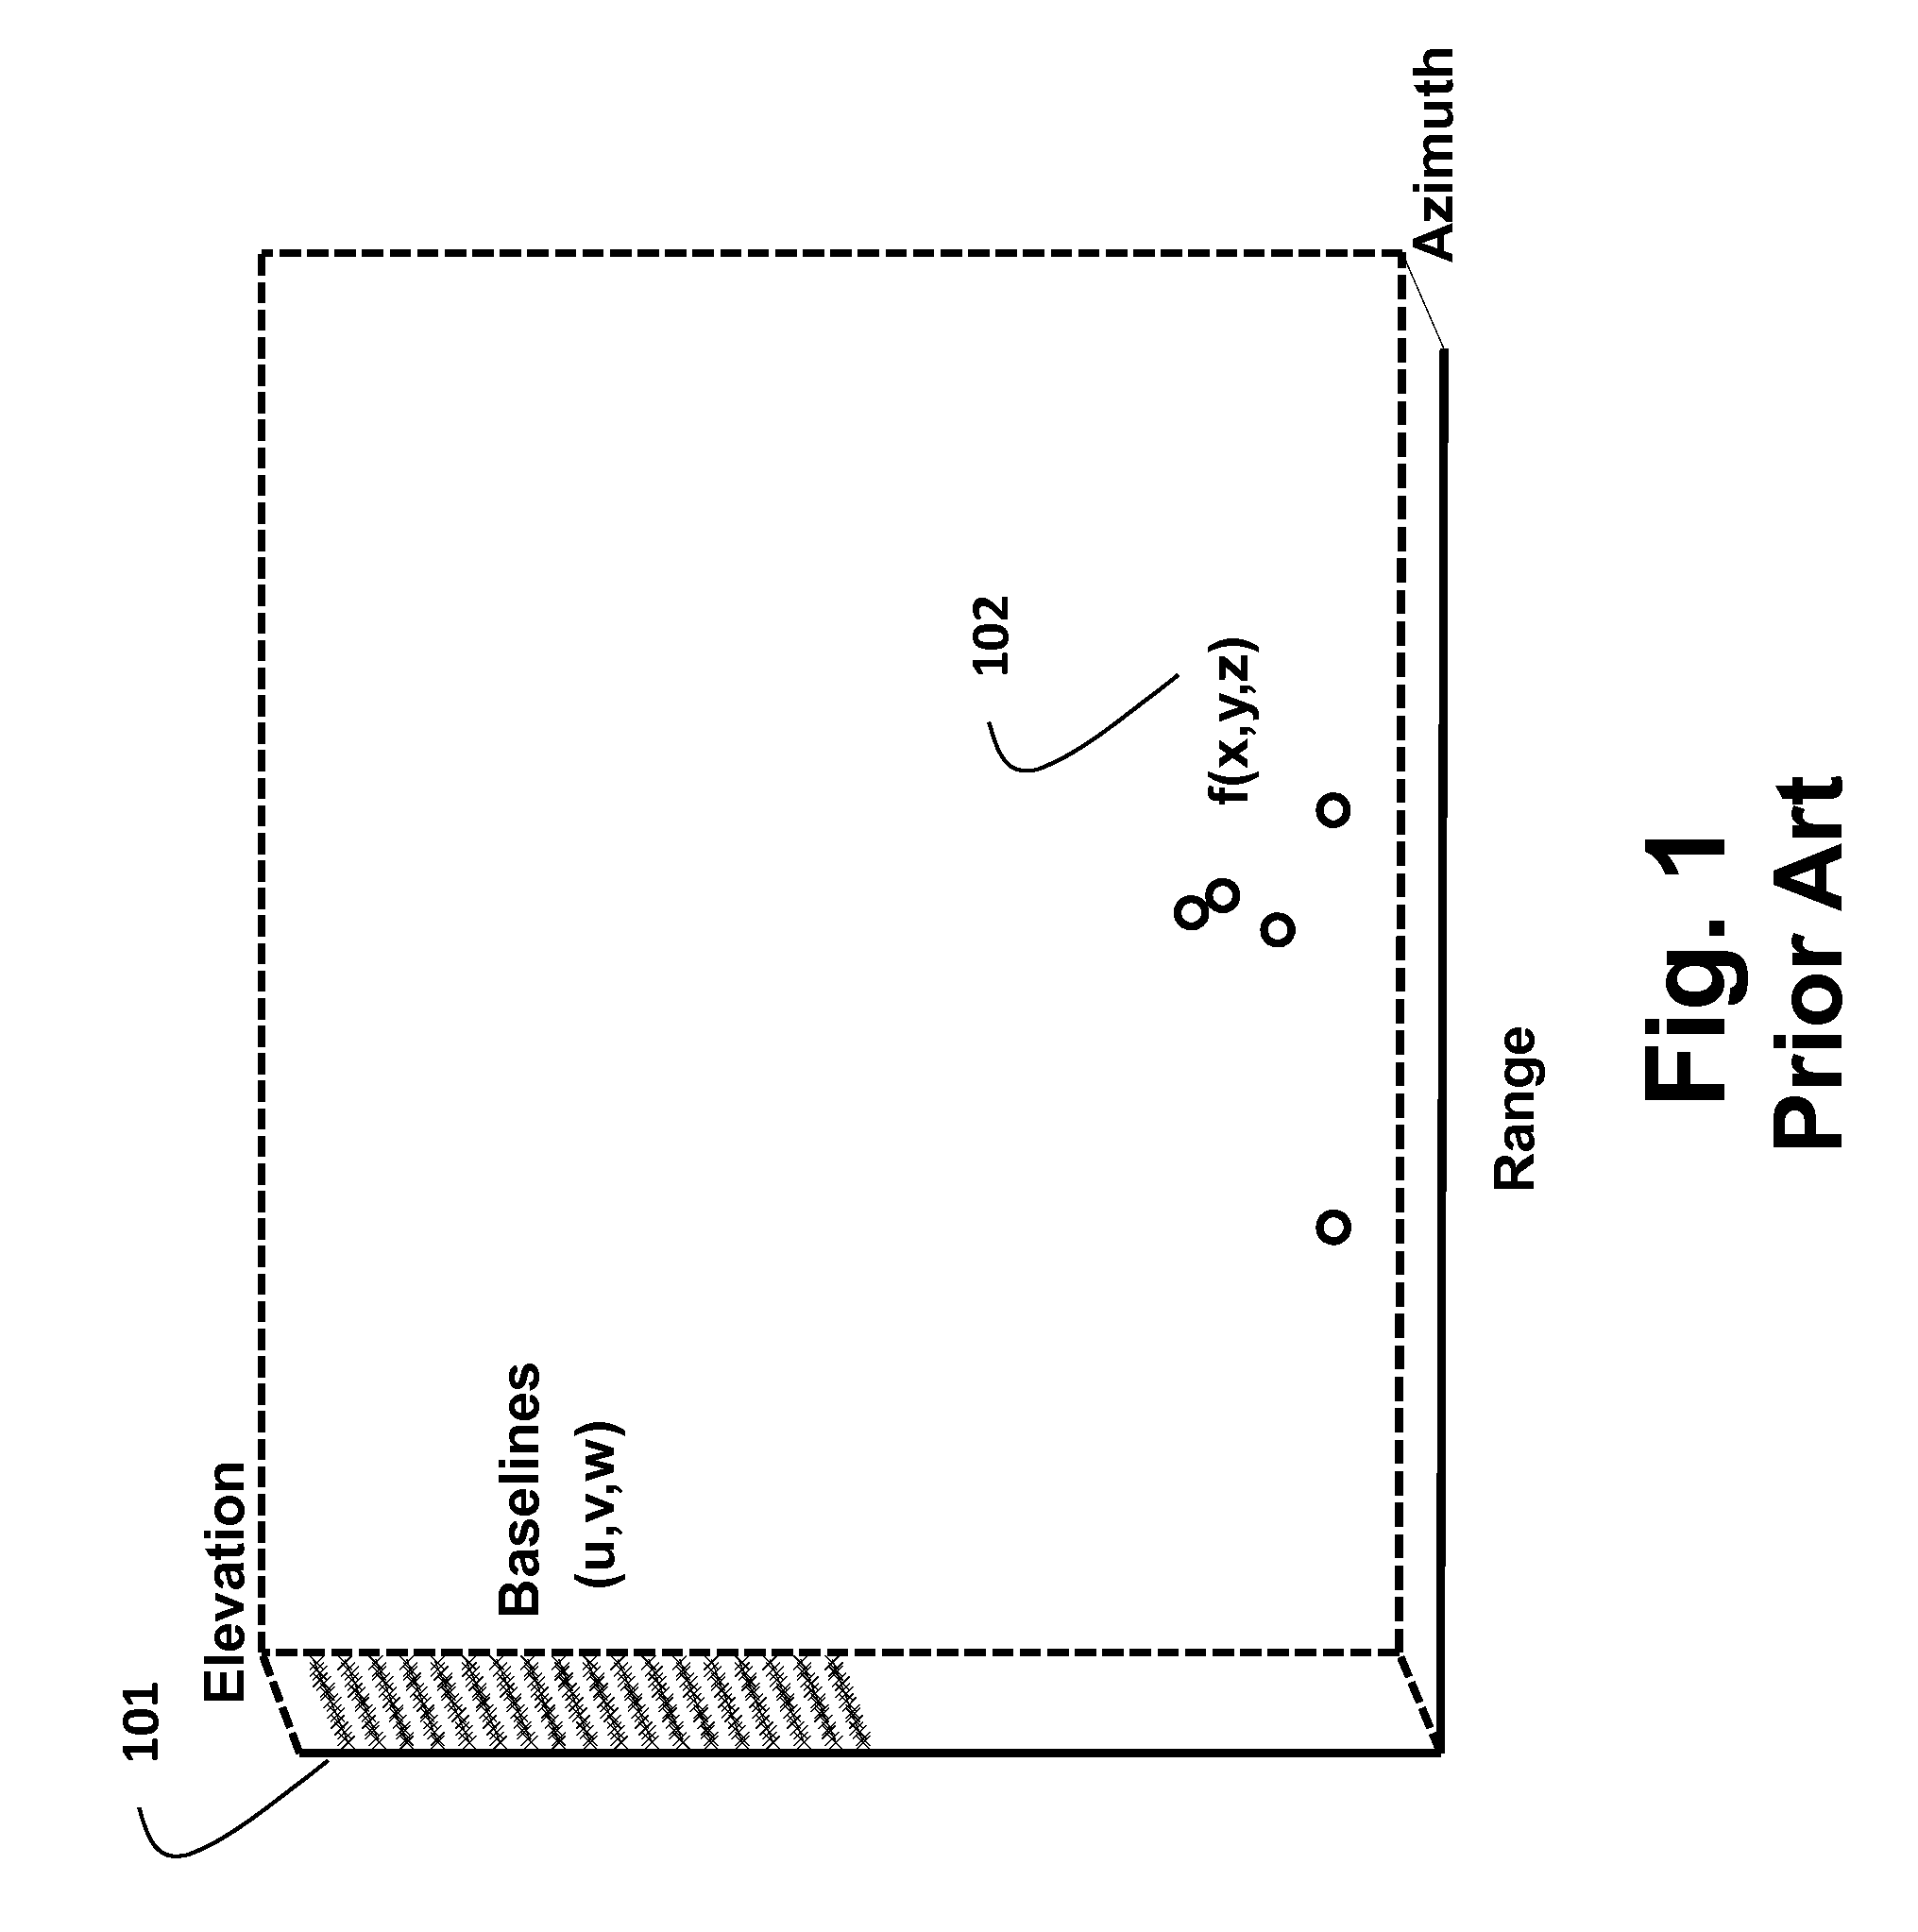 System and Method for 3D Imaging using Compressive Sensing with Hyperplane Multi-Baseline Data